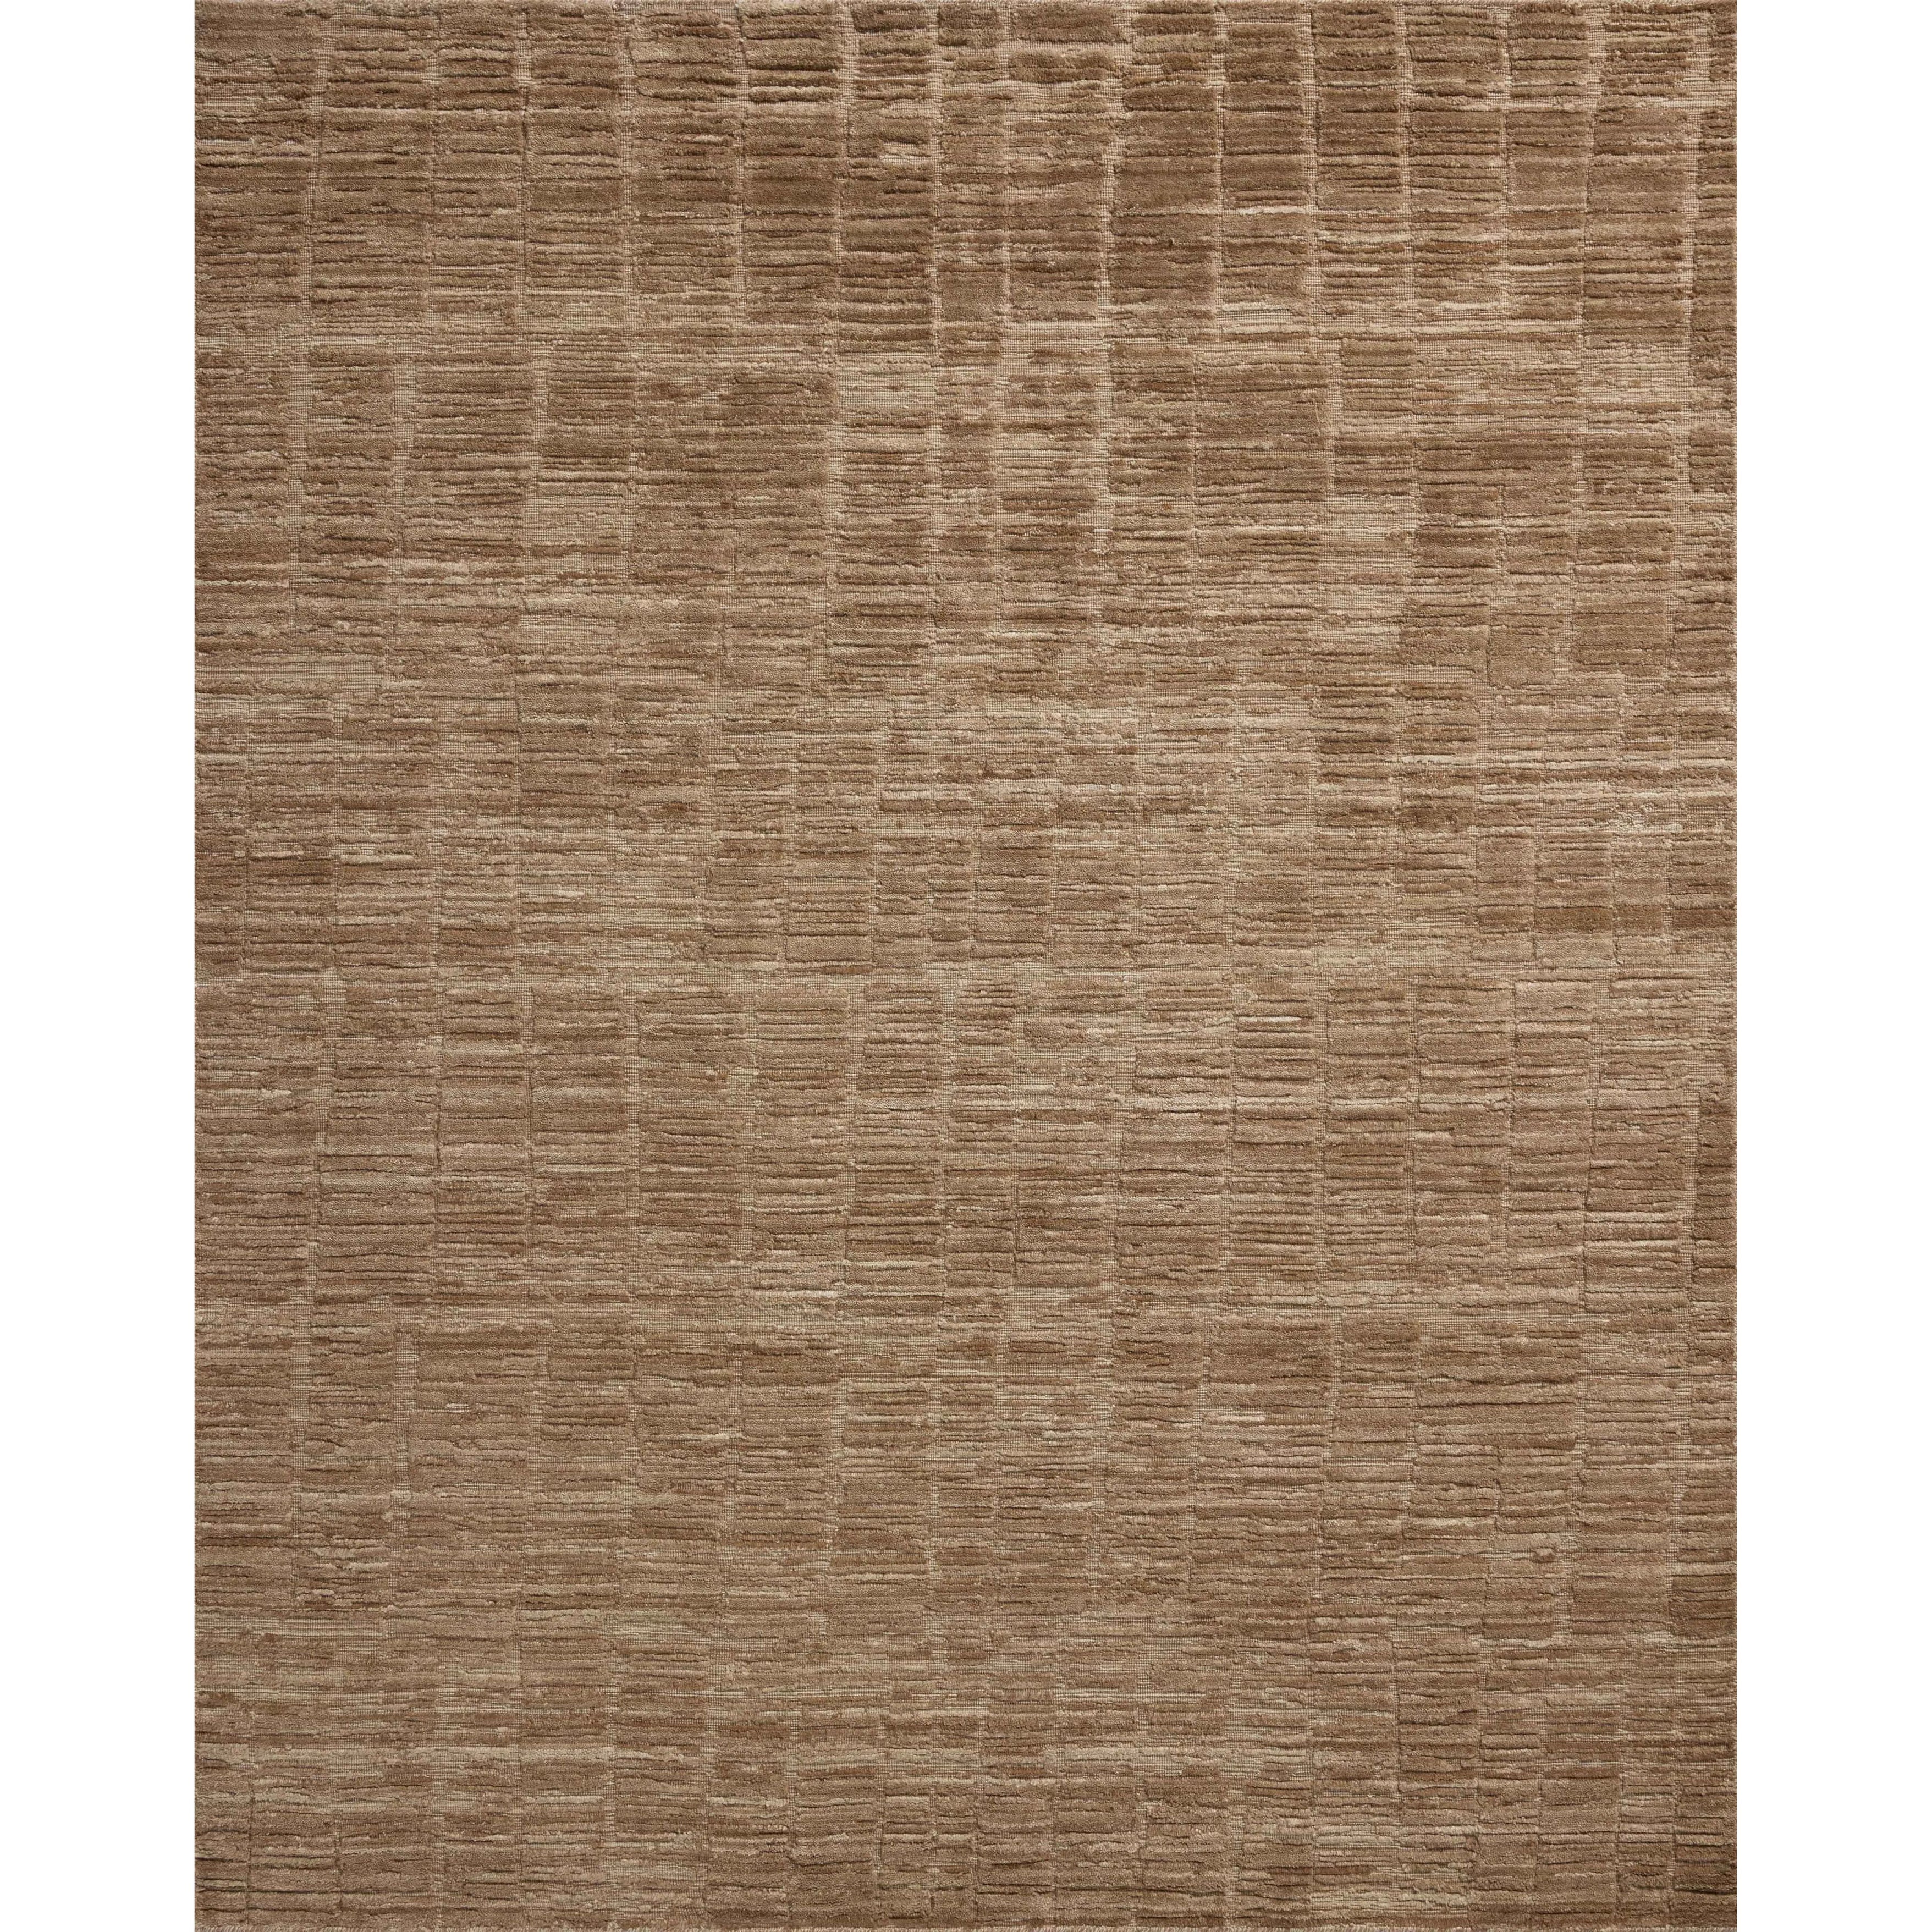 Area rugs in the Daniel Fawn Rug have a graphic design in a range of tonal palettes with a soft, gently ribbed texture. The hand-loomed pile is a blend of bamboo and wool with a slight sheen that captures the light and changes the rug’s sense of depth throughout the day. Amethyst Home provides interior design, new home construction design consulting, vintage area rugs, and lighting in the Park City metro area.